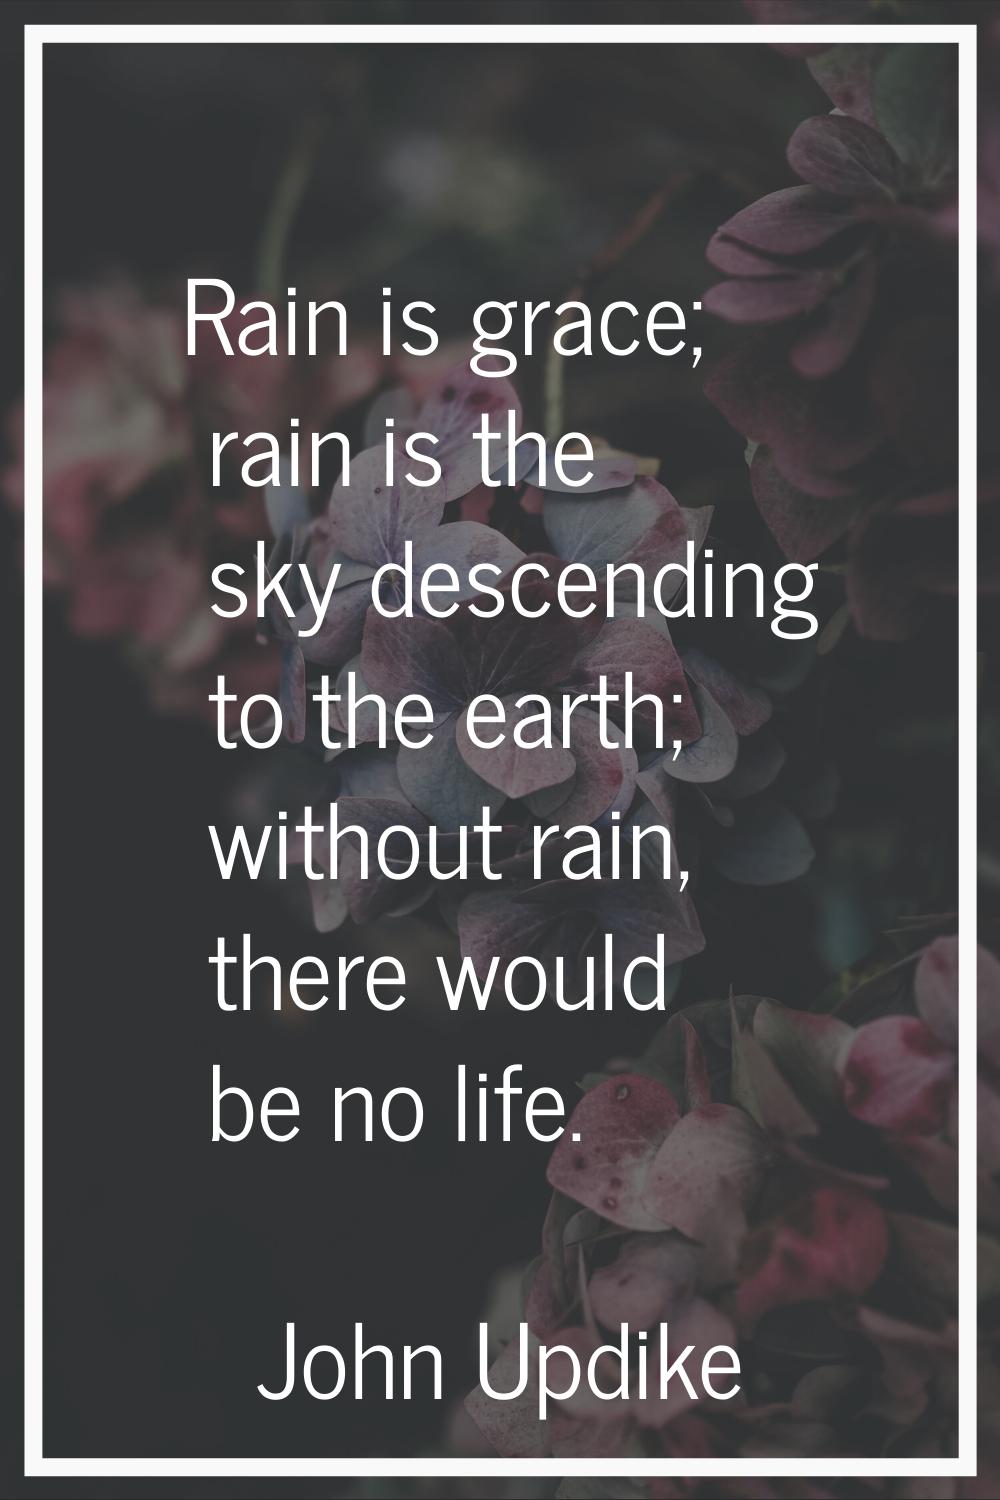 Rain is grace; rain is the sky descending to the earth; without rain, there would be no life.